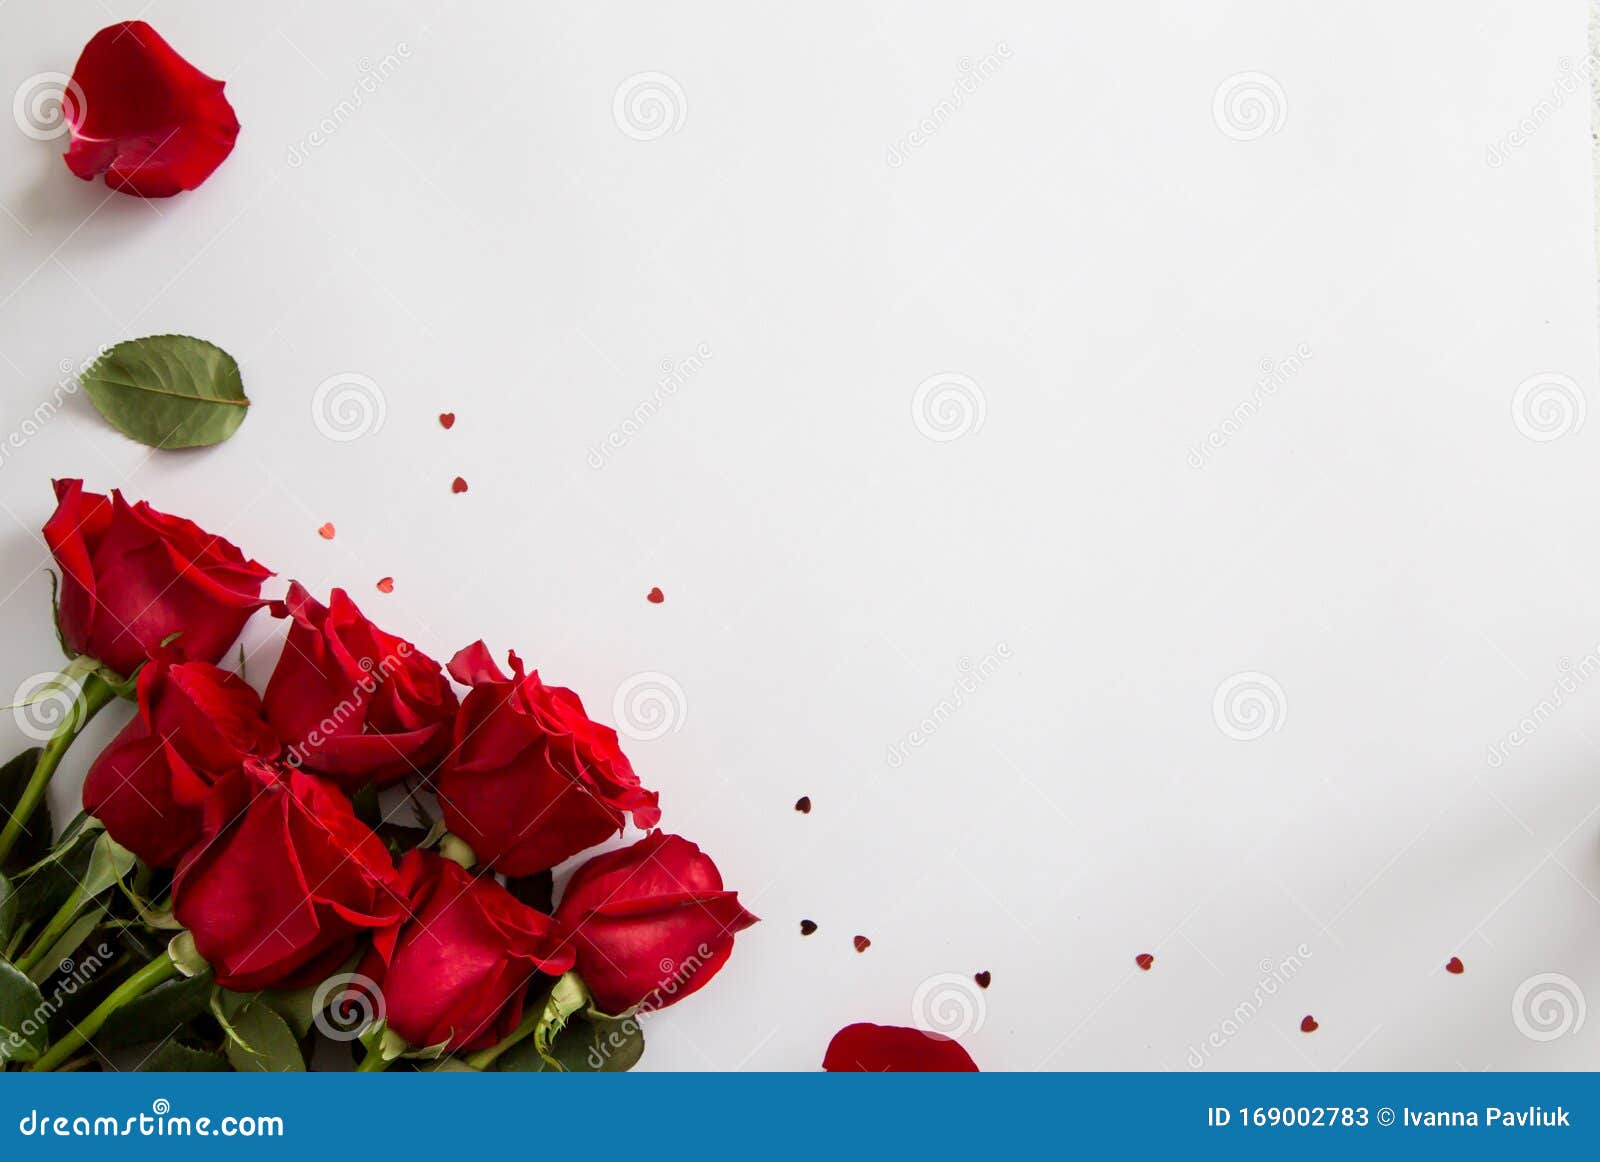 Red Roses on White Background. Valentines Day Background, Wedding Day Stock  Image - Image of background, holiday: 169002783